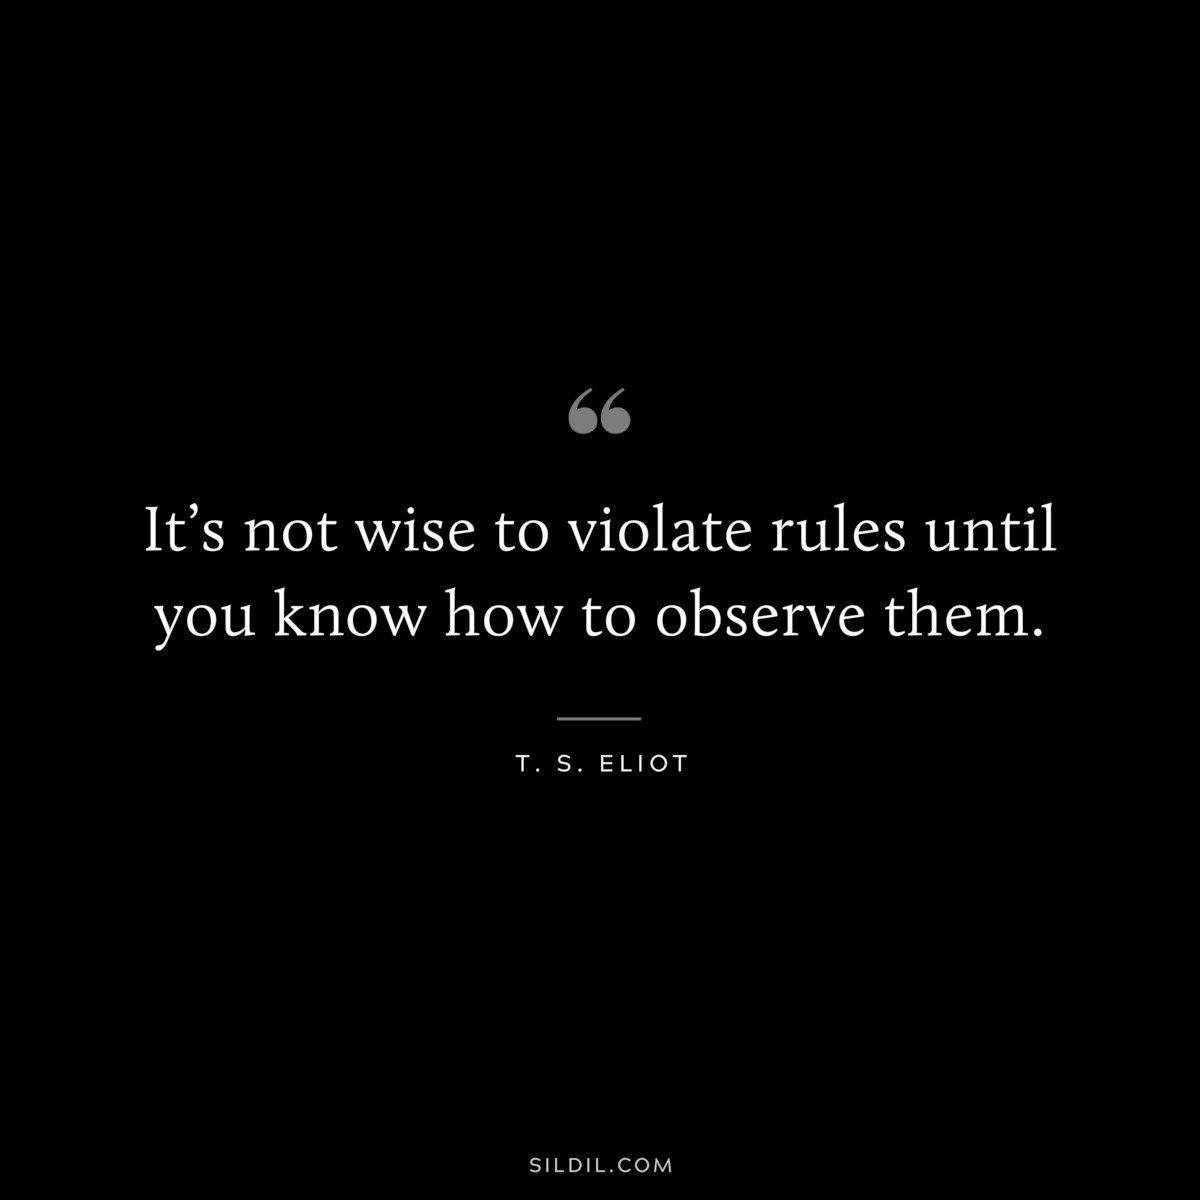 It’s not wise to violate rules until you know how to observe them. ― T. S. Eliot